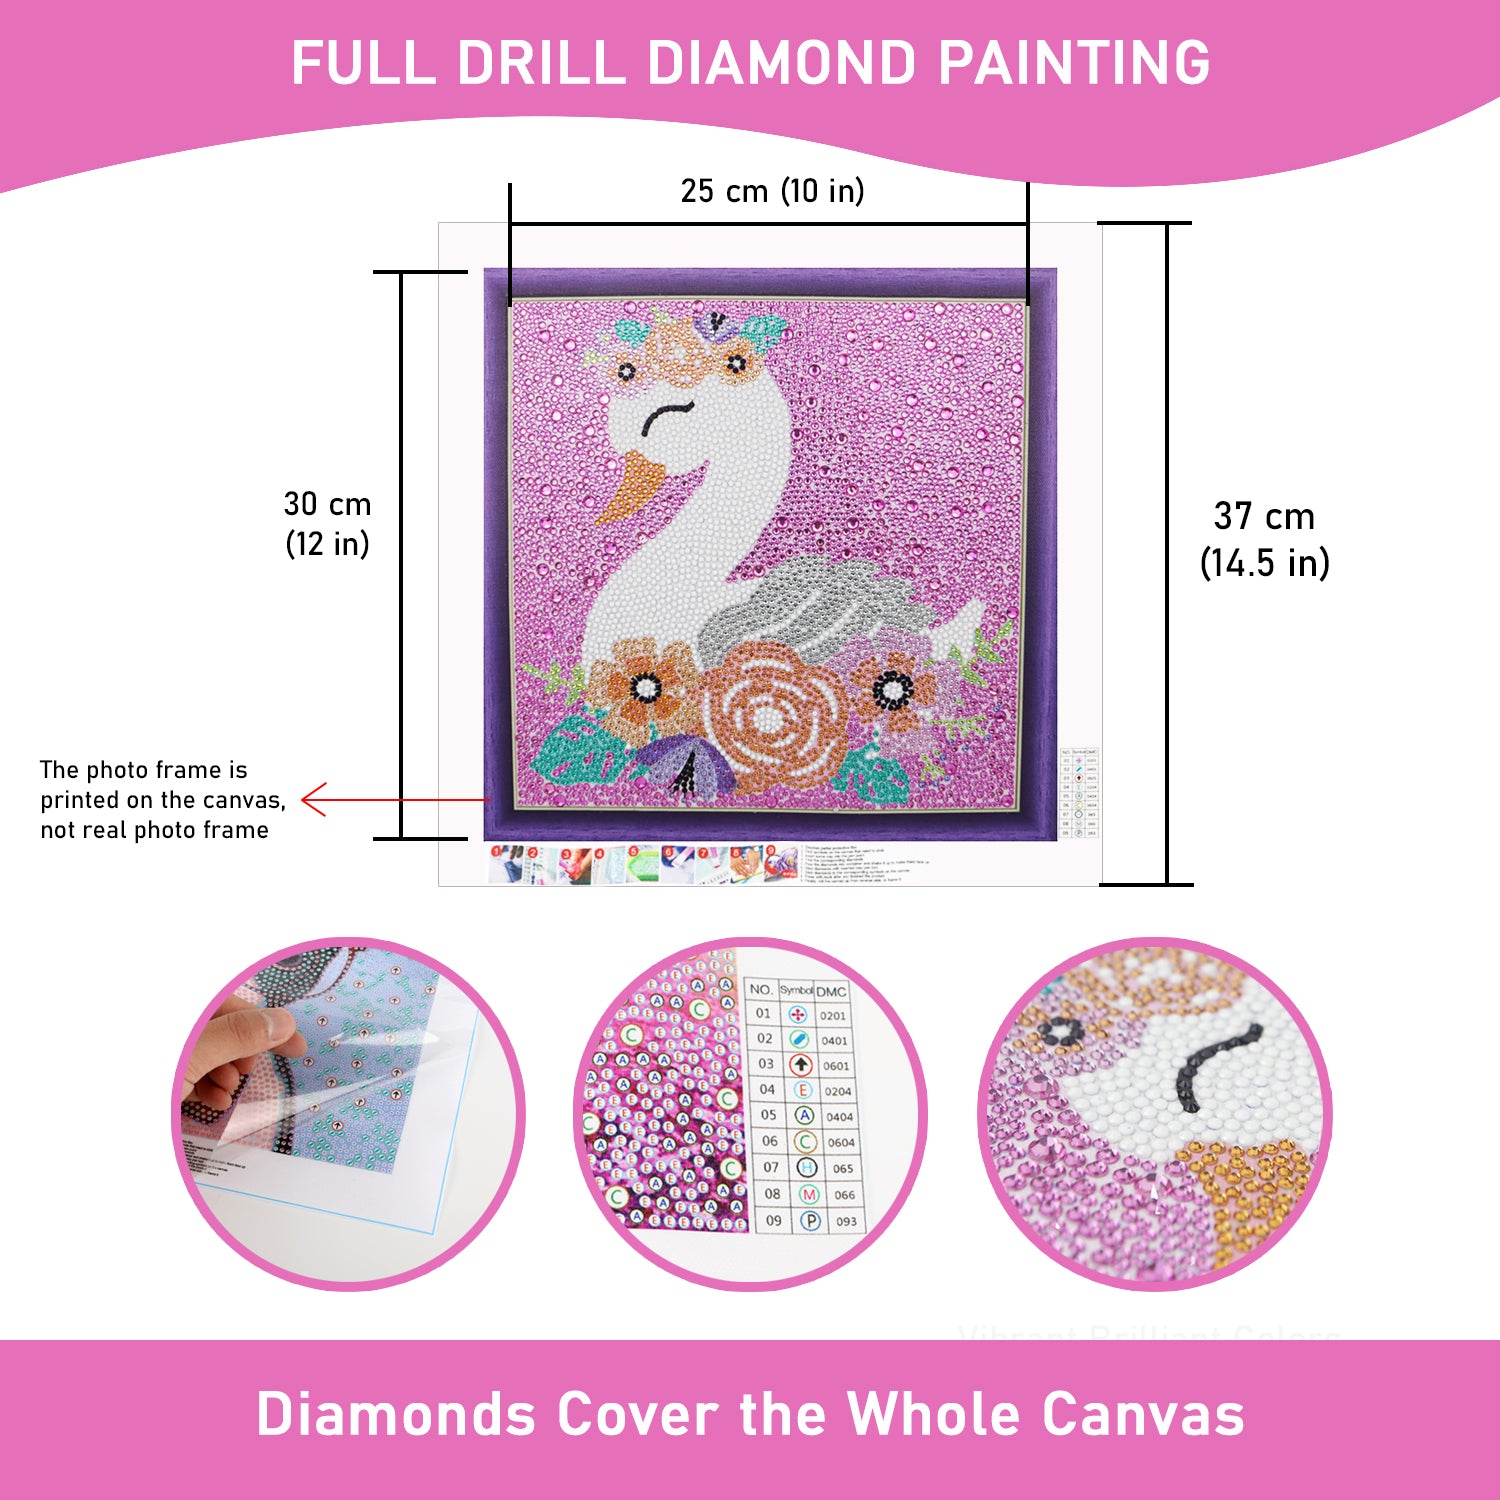 Adult Decorating DIY Diamond Painting Kit - 5D Full Diamond Diamond Art  Painting for Beginners - Pink House Canvas Craft Paint with Diamonds 12x12  Inches 